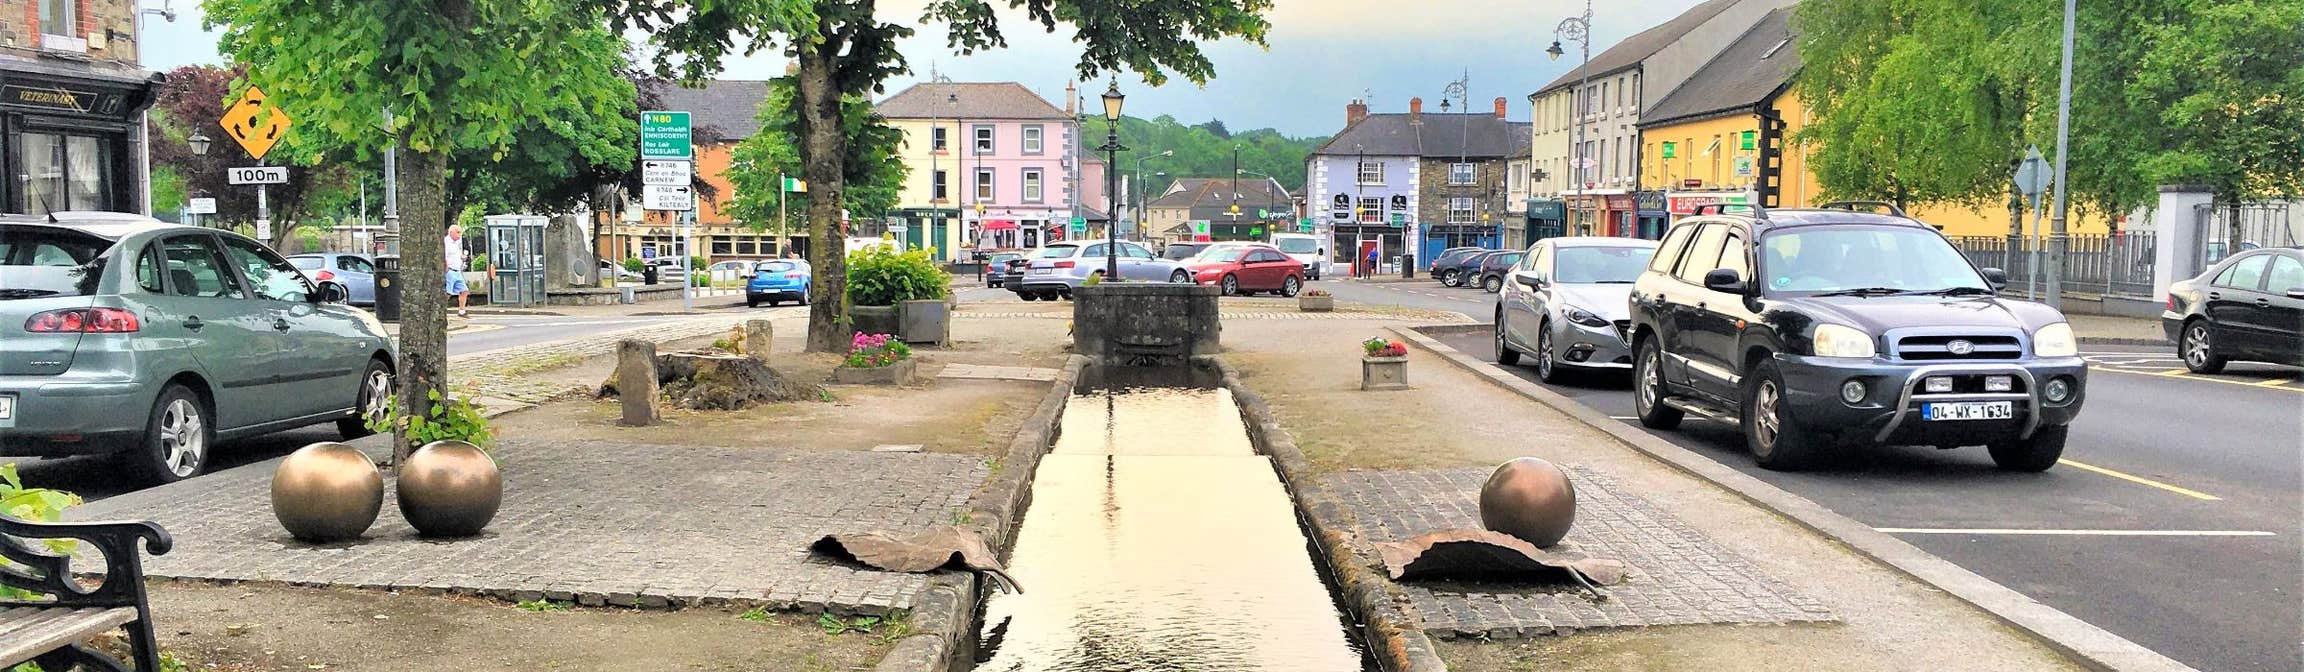 Image of Bunclody town in County Wexford